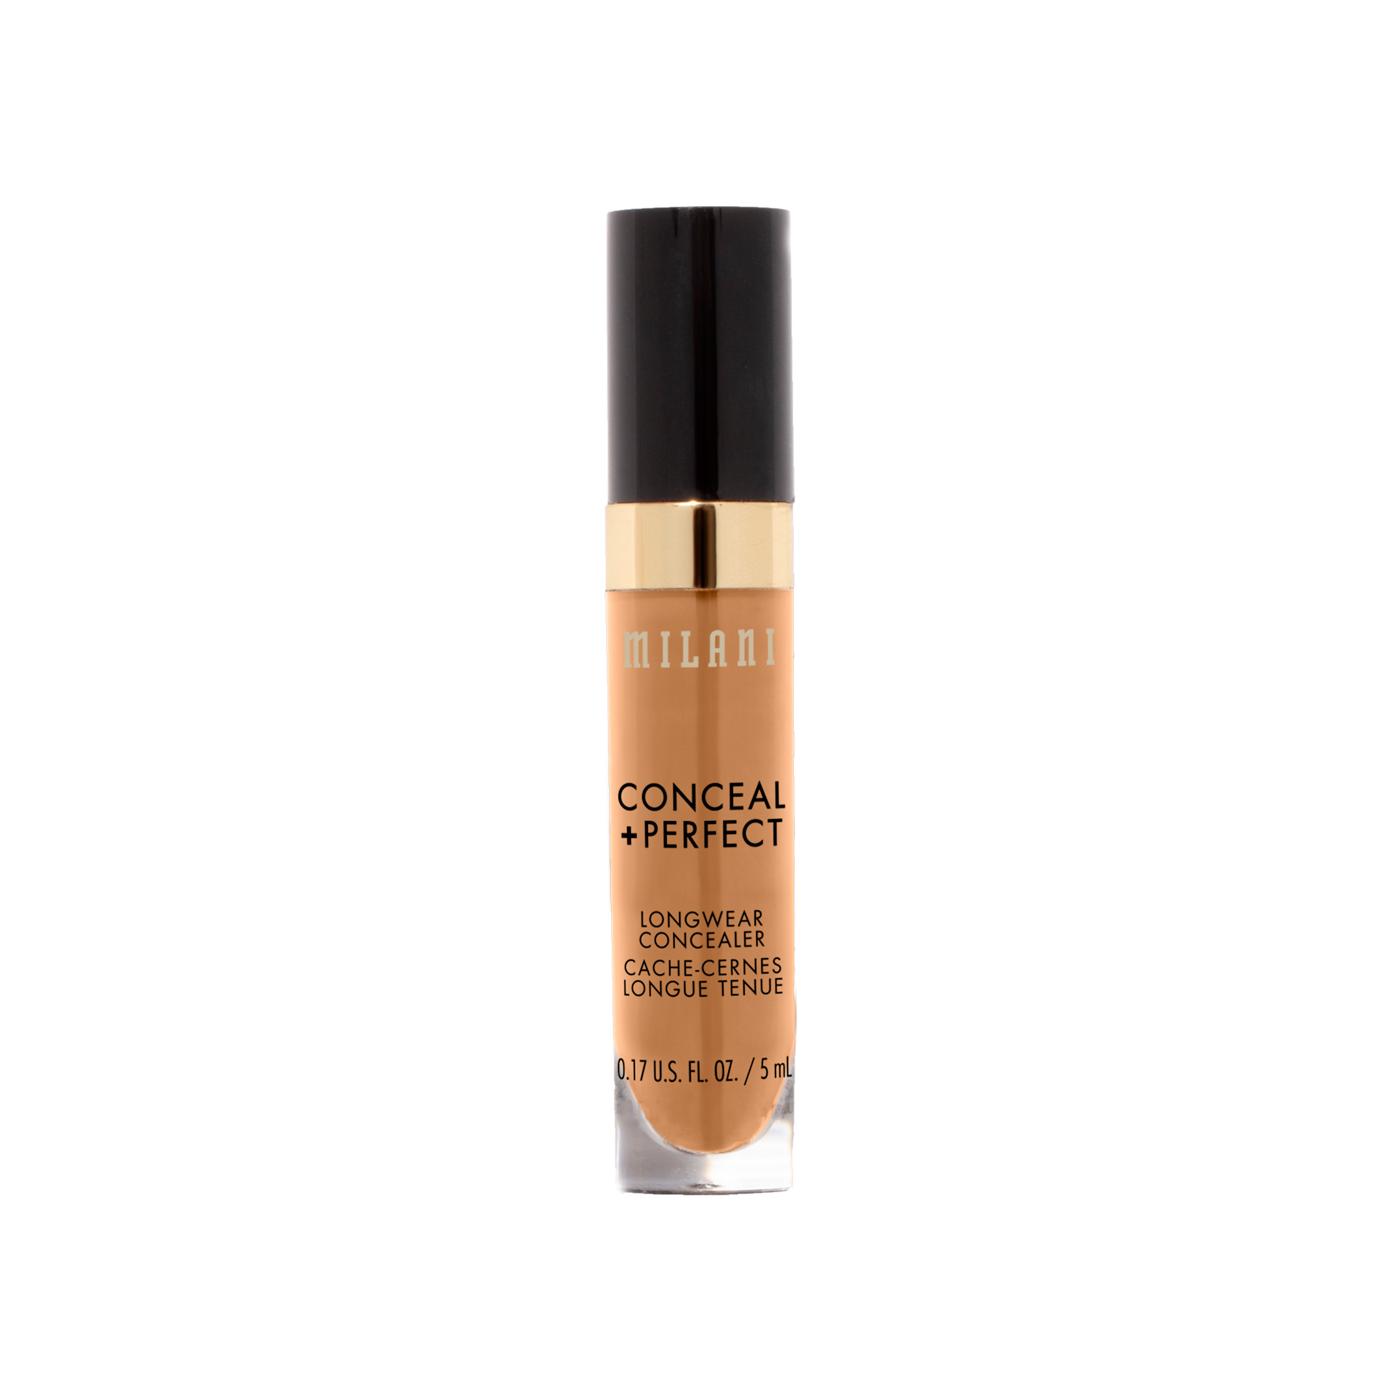 Milani Conceal +Perfect Longwear Concealer - Cool Sand; image 1 of 9